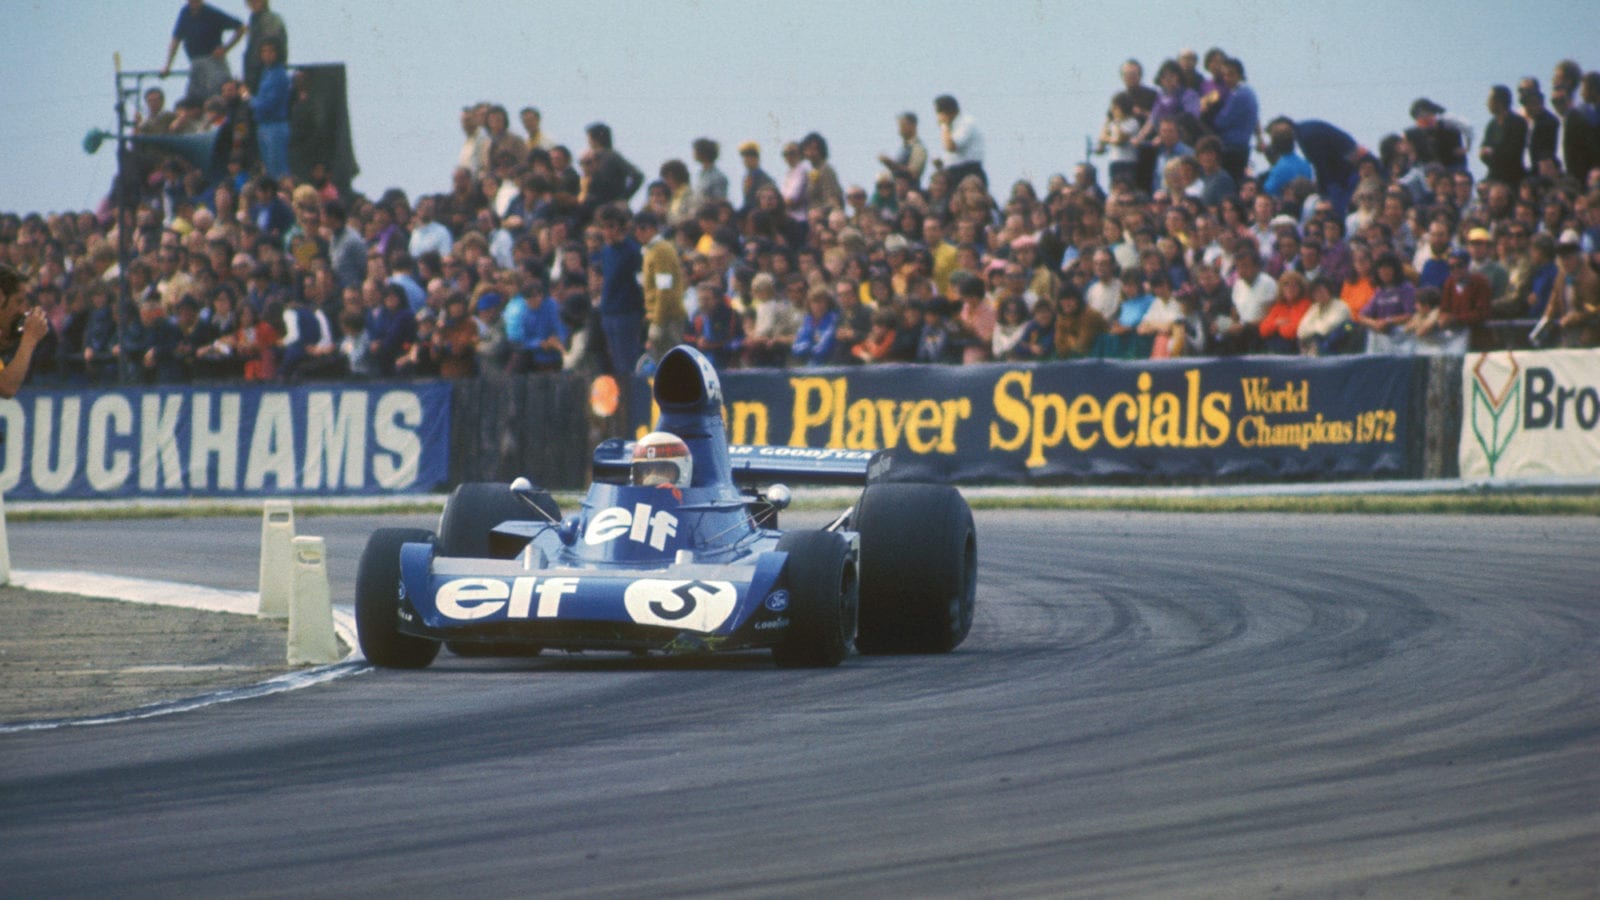 Jackie Stewart in his Tyrrell Ford during the 1973 British Grand Prix at Silverstone